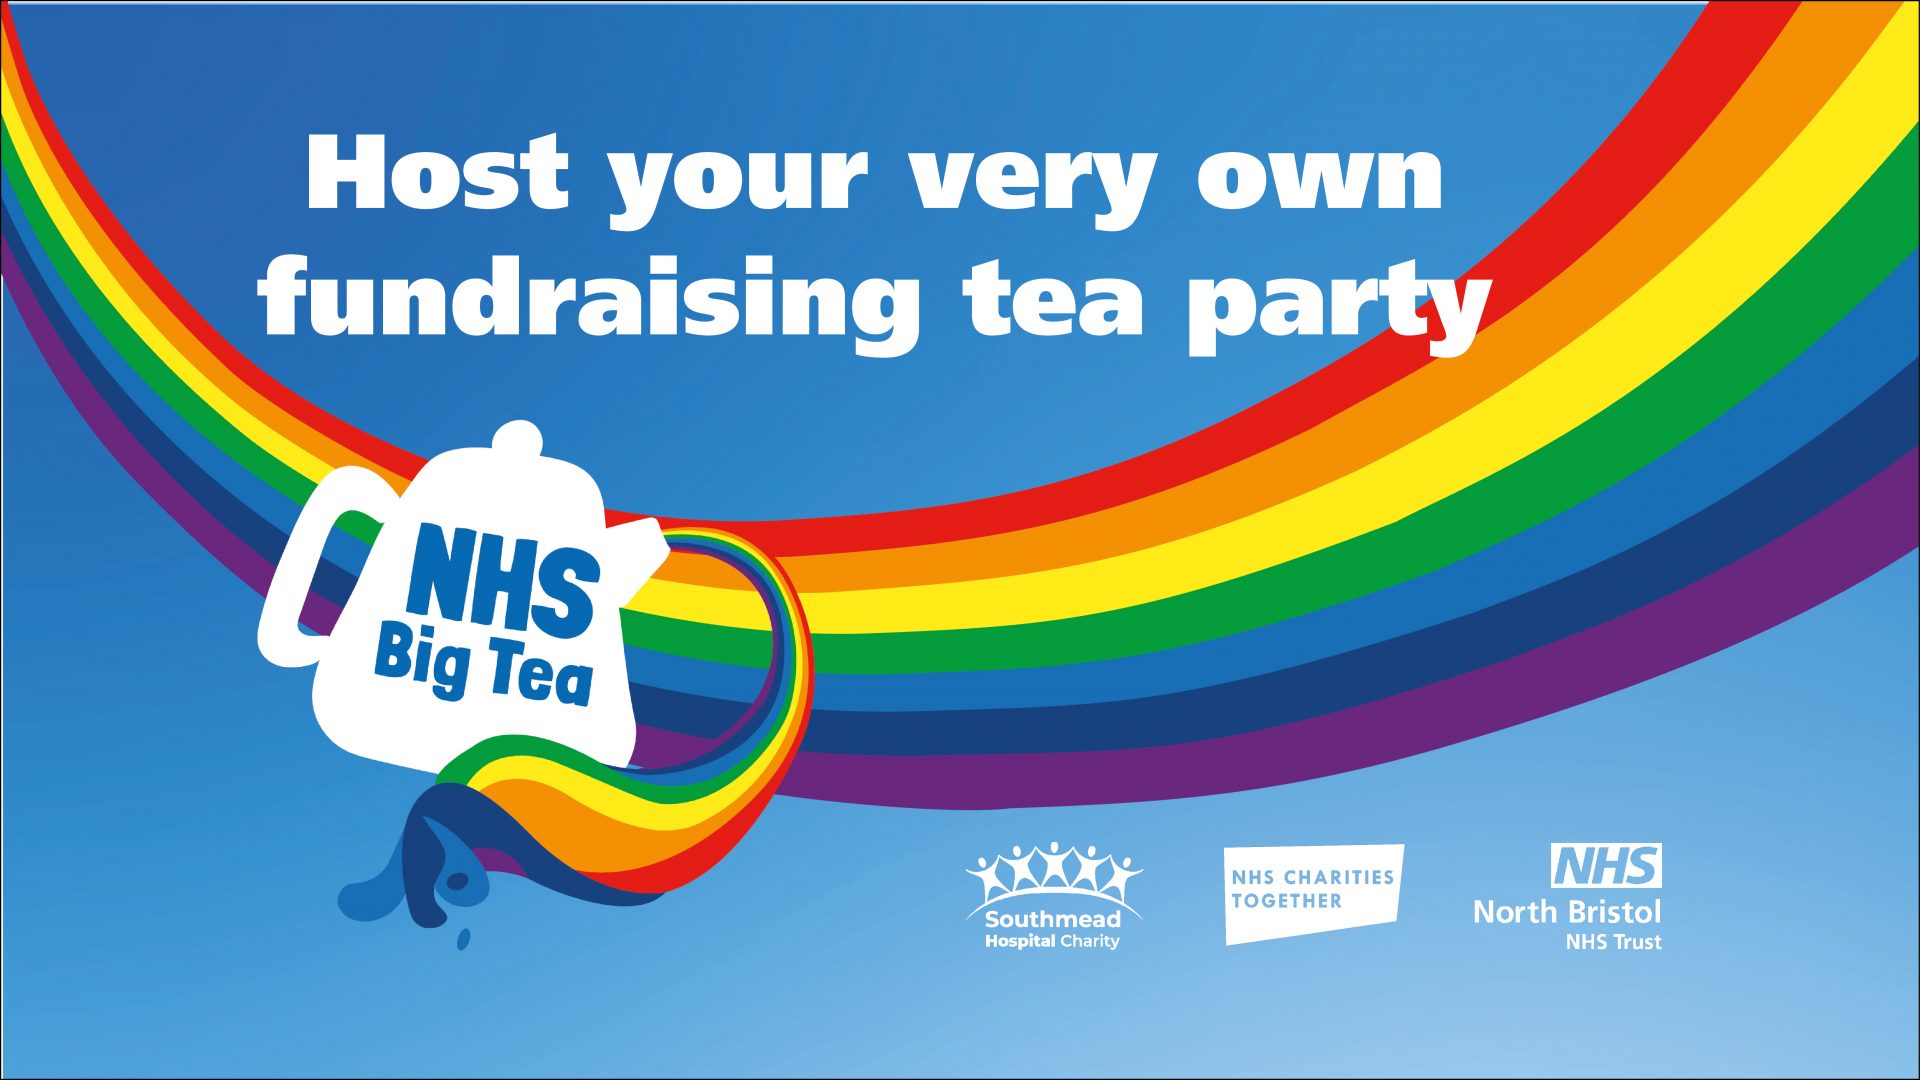 Southmead Hospital Charity Graphic advertising the NHS Big Tea with the words Host your very own fundraising tea party